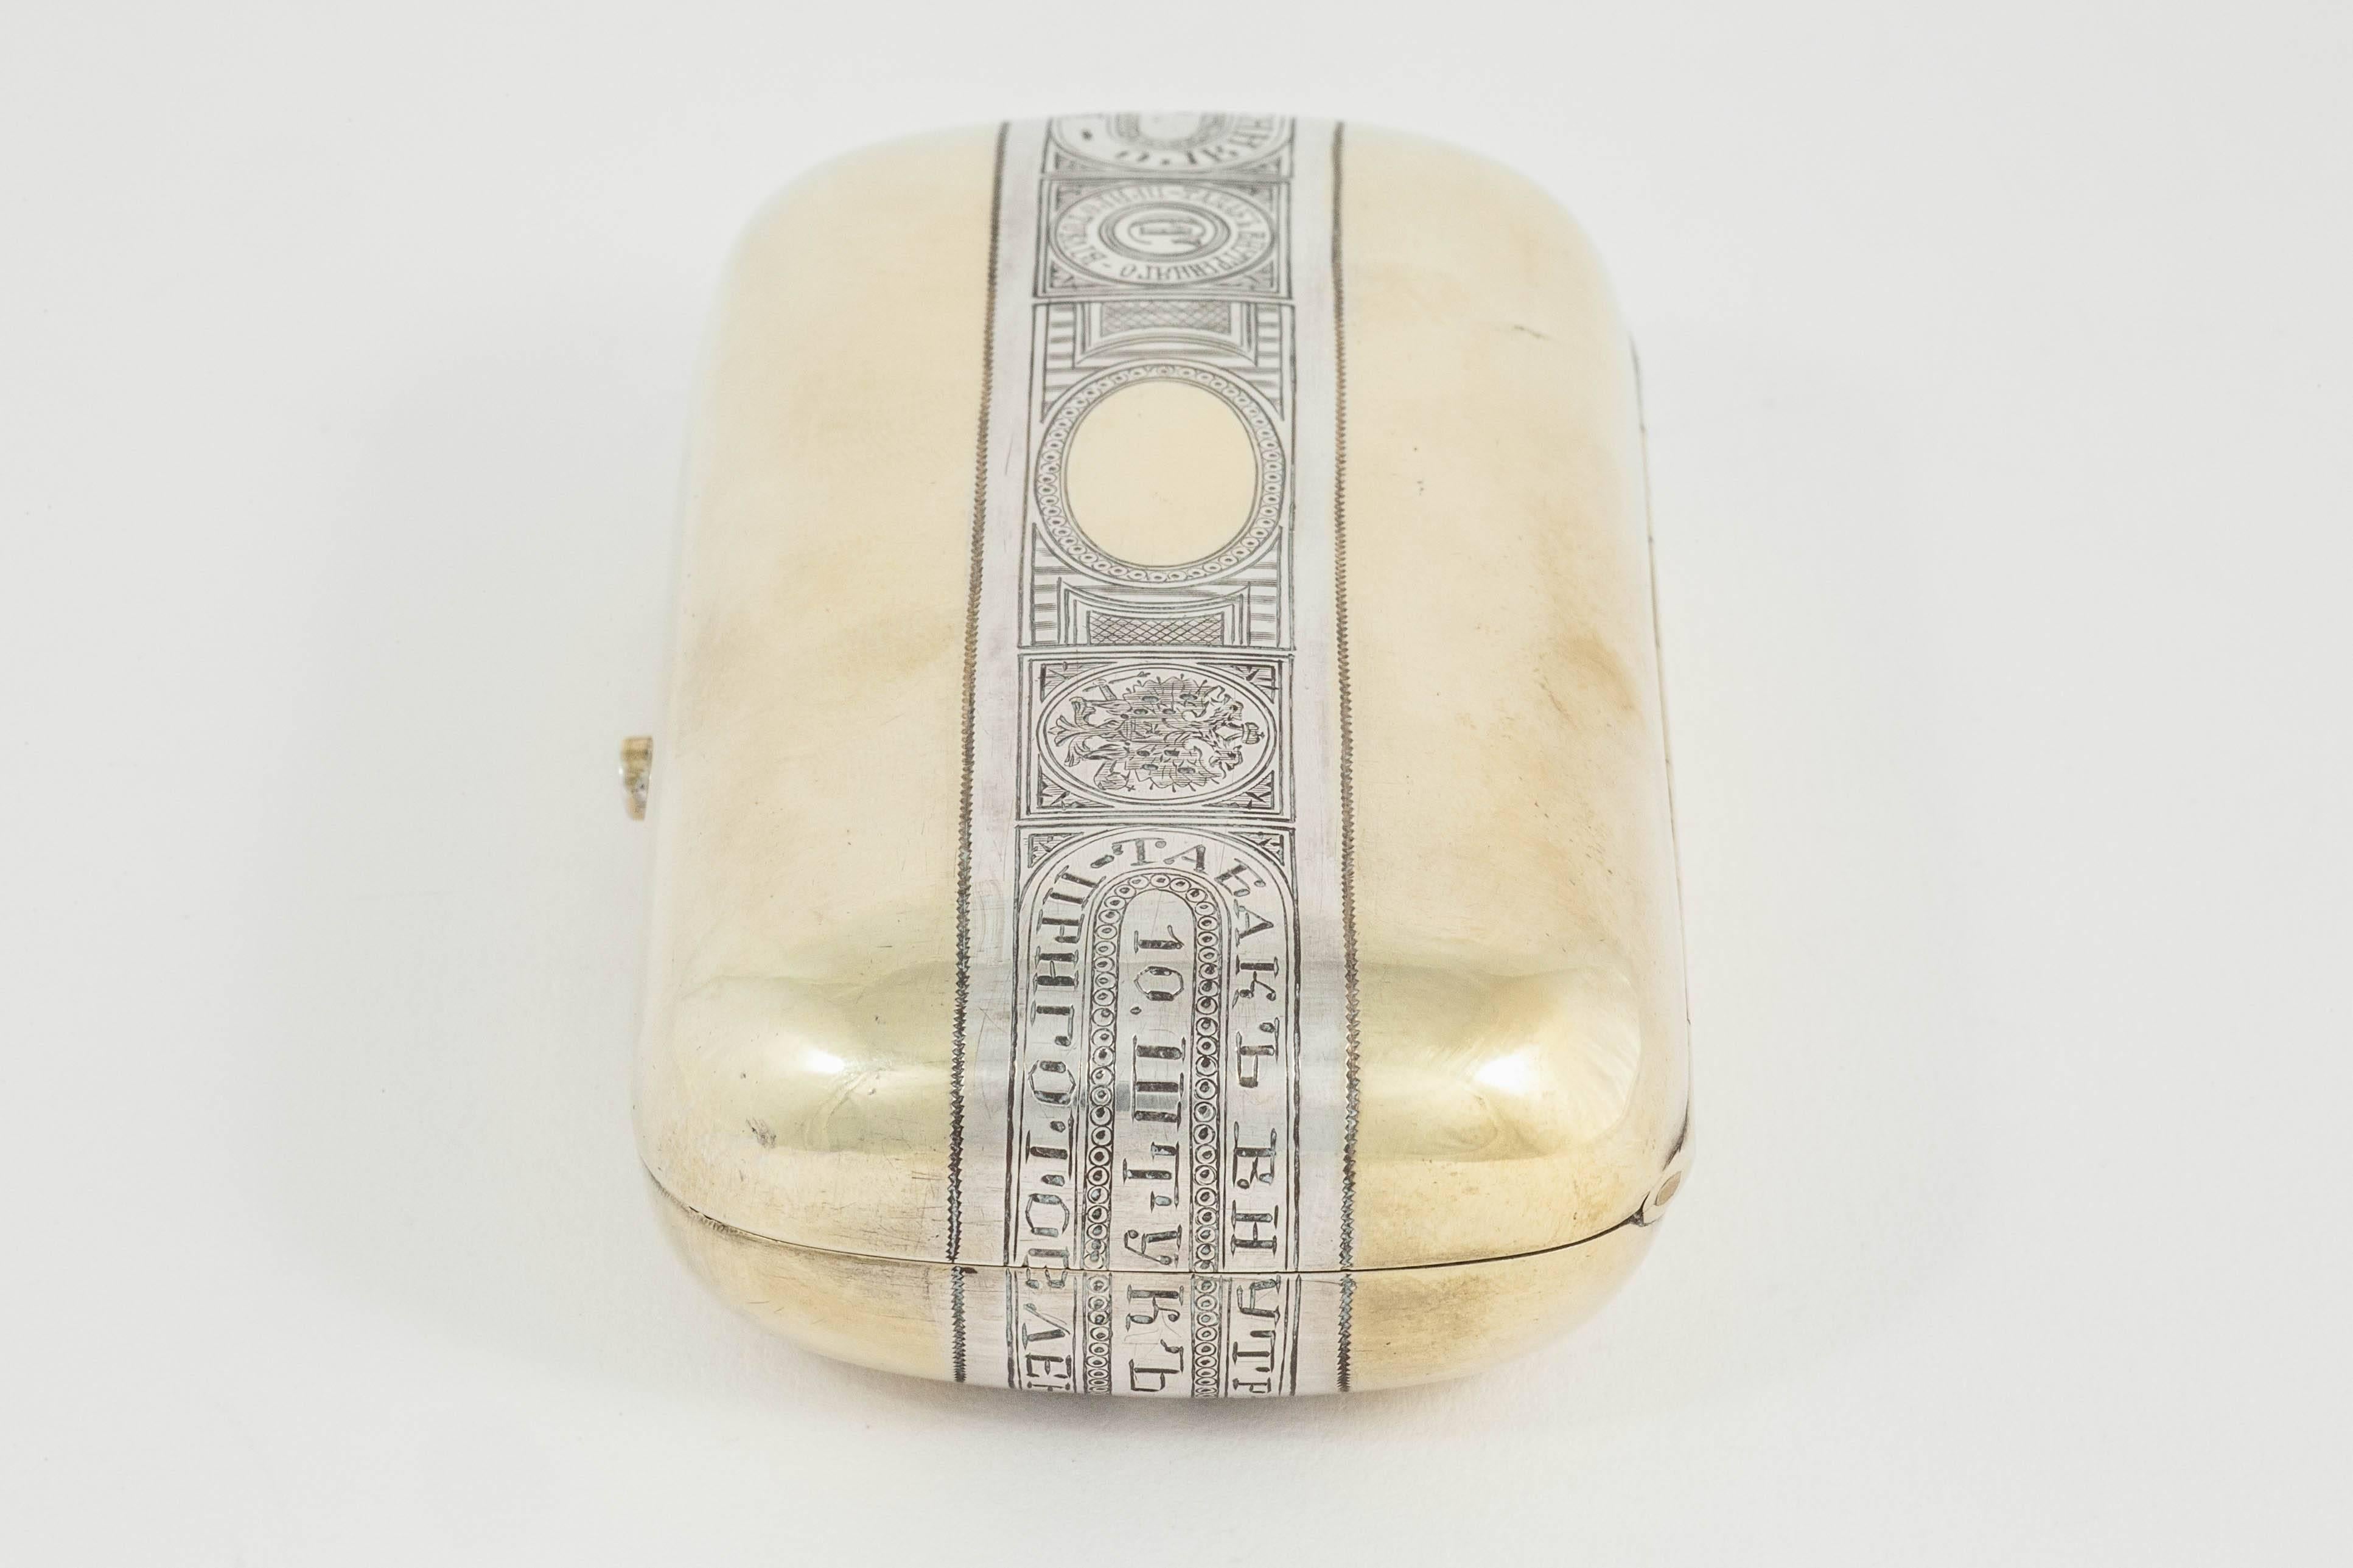 A fine parcel-gilt Russian cigar or cigarette case for the pocket in original presentation box. While the body of the case is gold-plated, the beautifully engraved trompe l'oeil cigar band is left as plain silver to allow the fine detail to stand